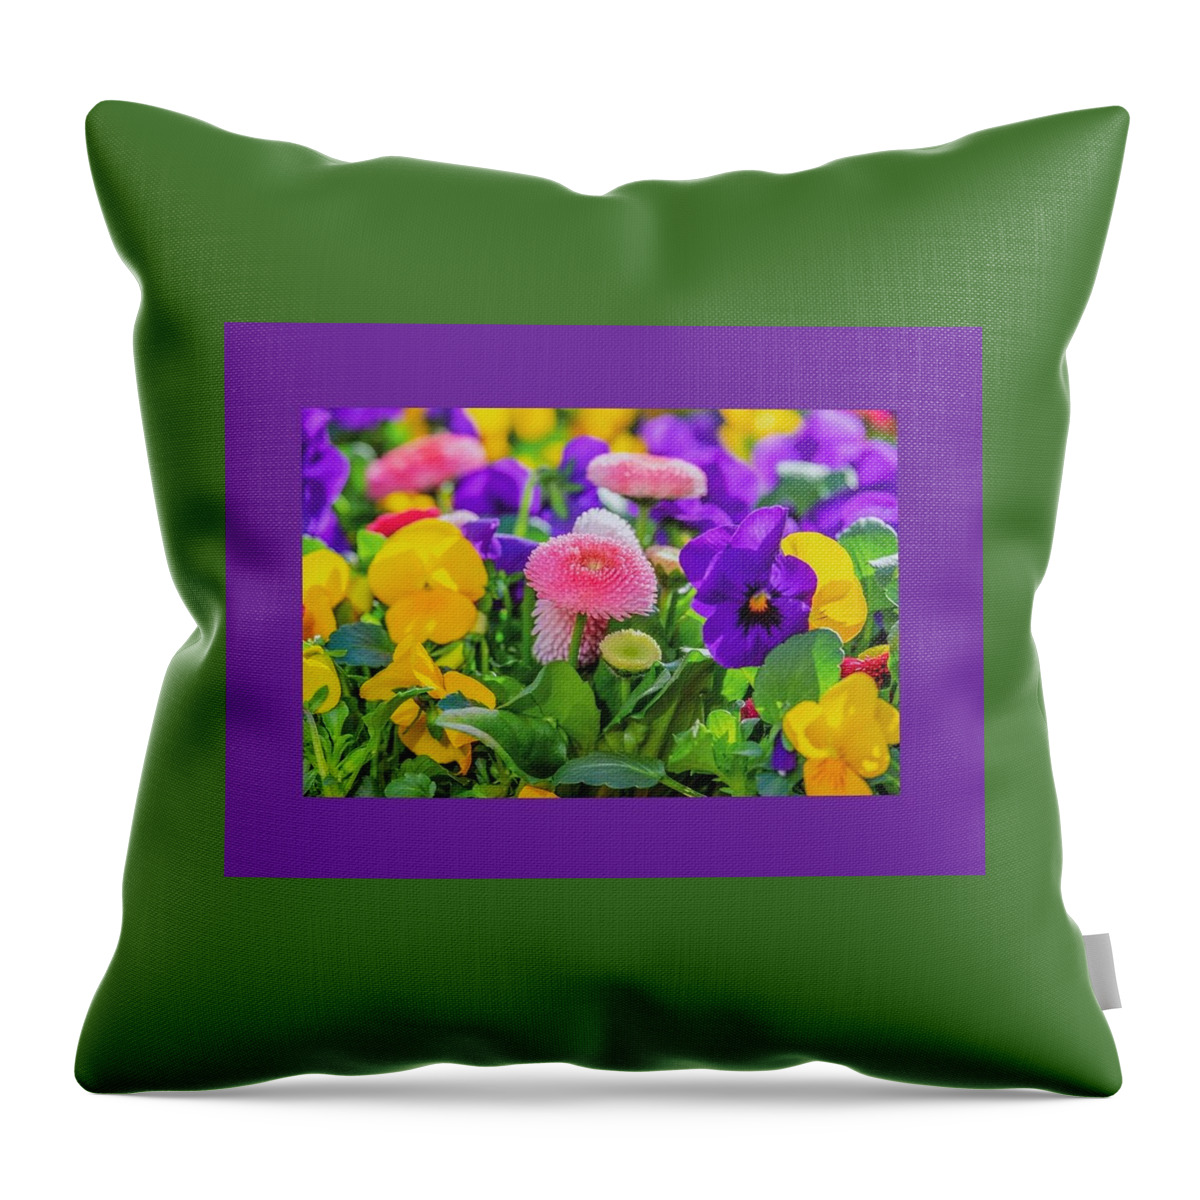 Spring Flowers Throw Pillow featuring the mixed media Spring Flowers by Nancy Ayanna Wyatt